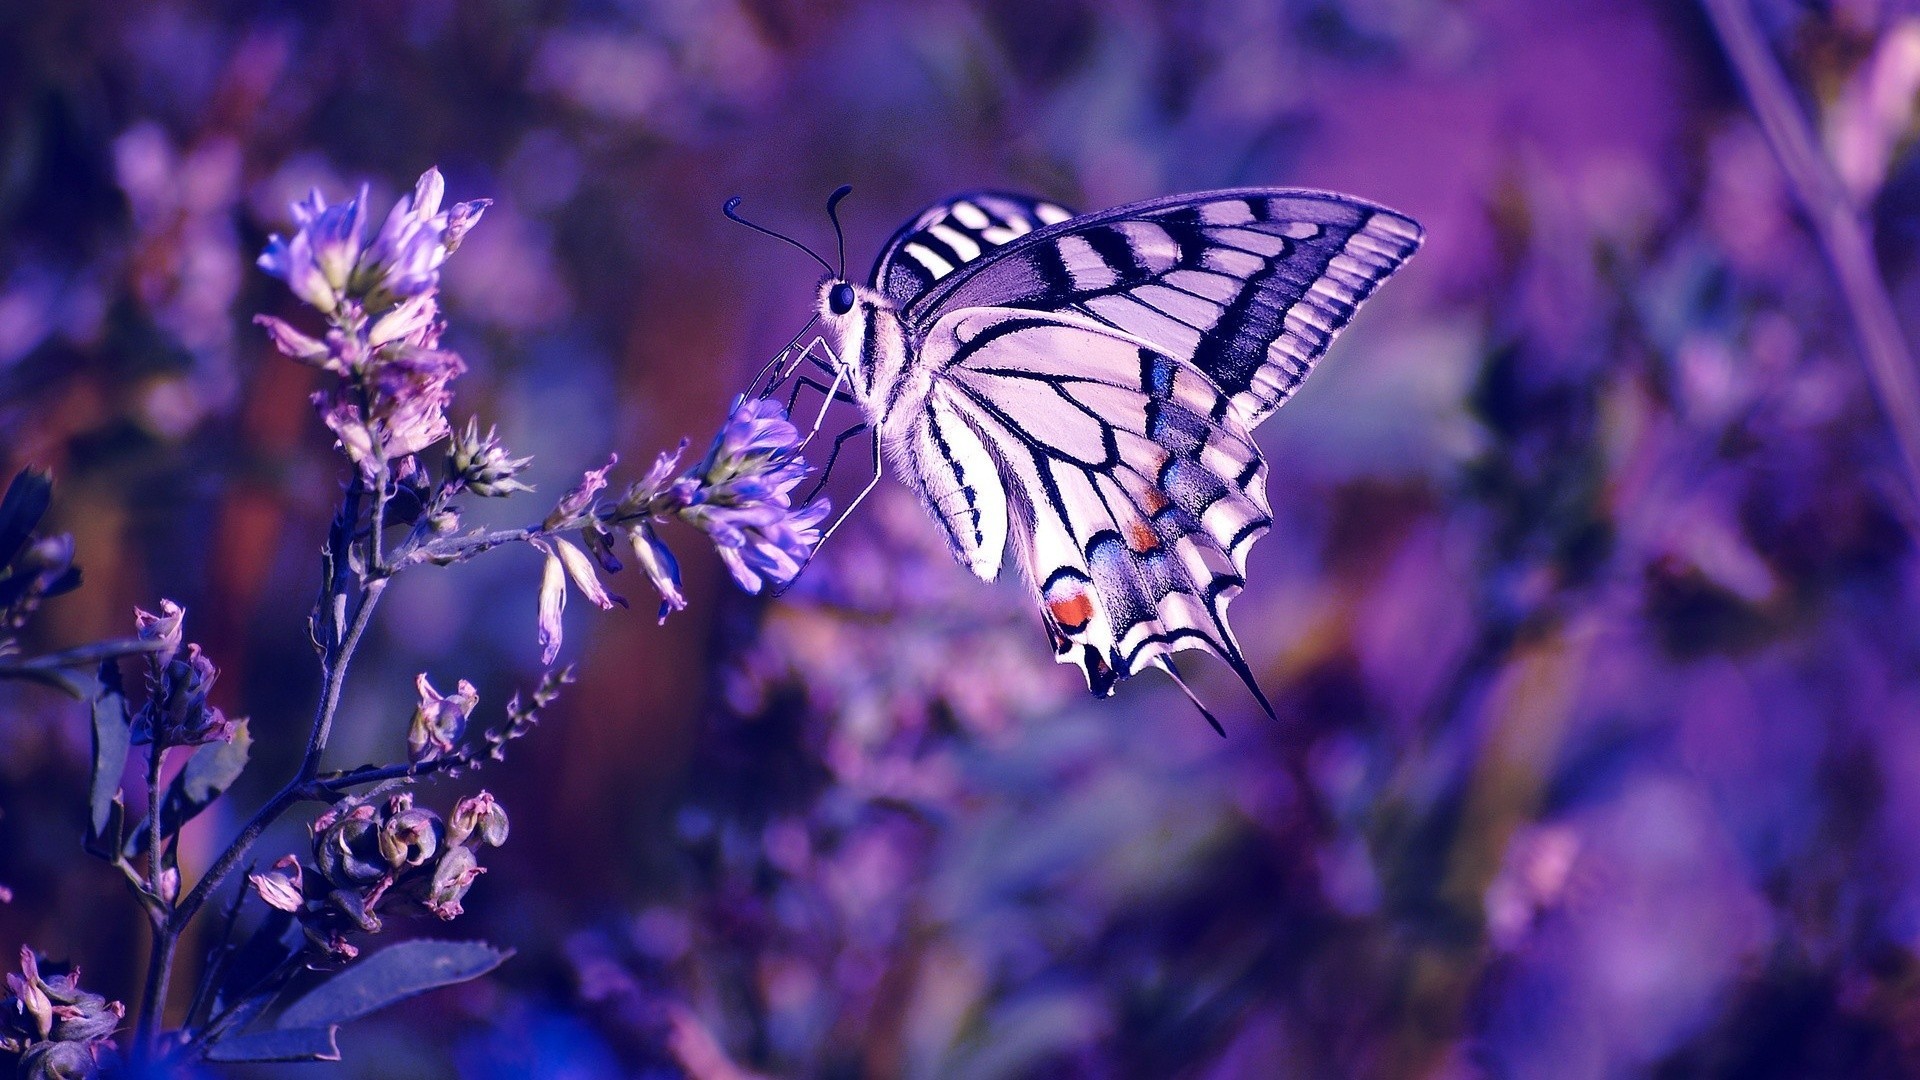 1920x1080 Pretty Butterfly Backgrounds Wallpaper Cave Epic Car Wallpapers Pinterest Wallpaper Butterfly Wallpaper And 3d Wallpaper 1920x1080